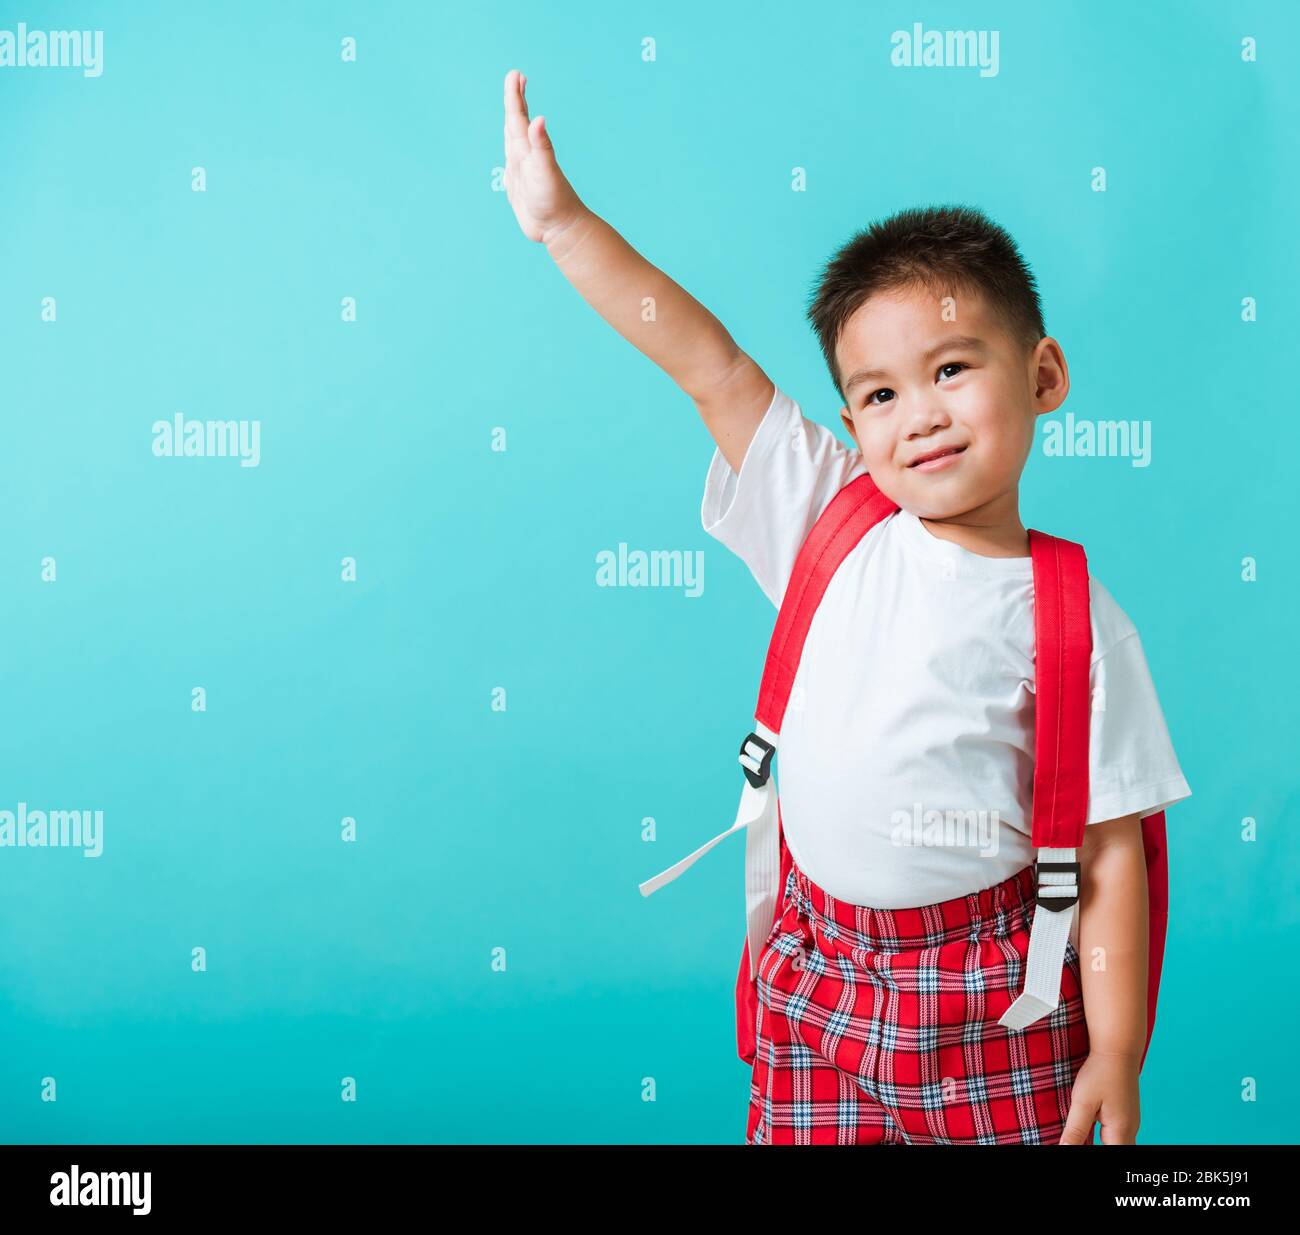 Back To School Portrait Happy Asian Cute Little Child Boy In Uniform Smile Raise Hands Up Glad When Go Back To School Isolated Blue Background Kid Stock Photo Alamy